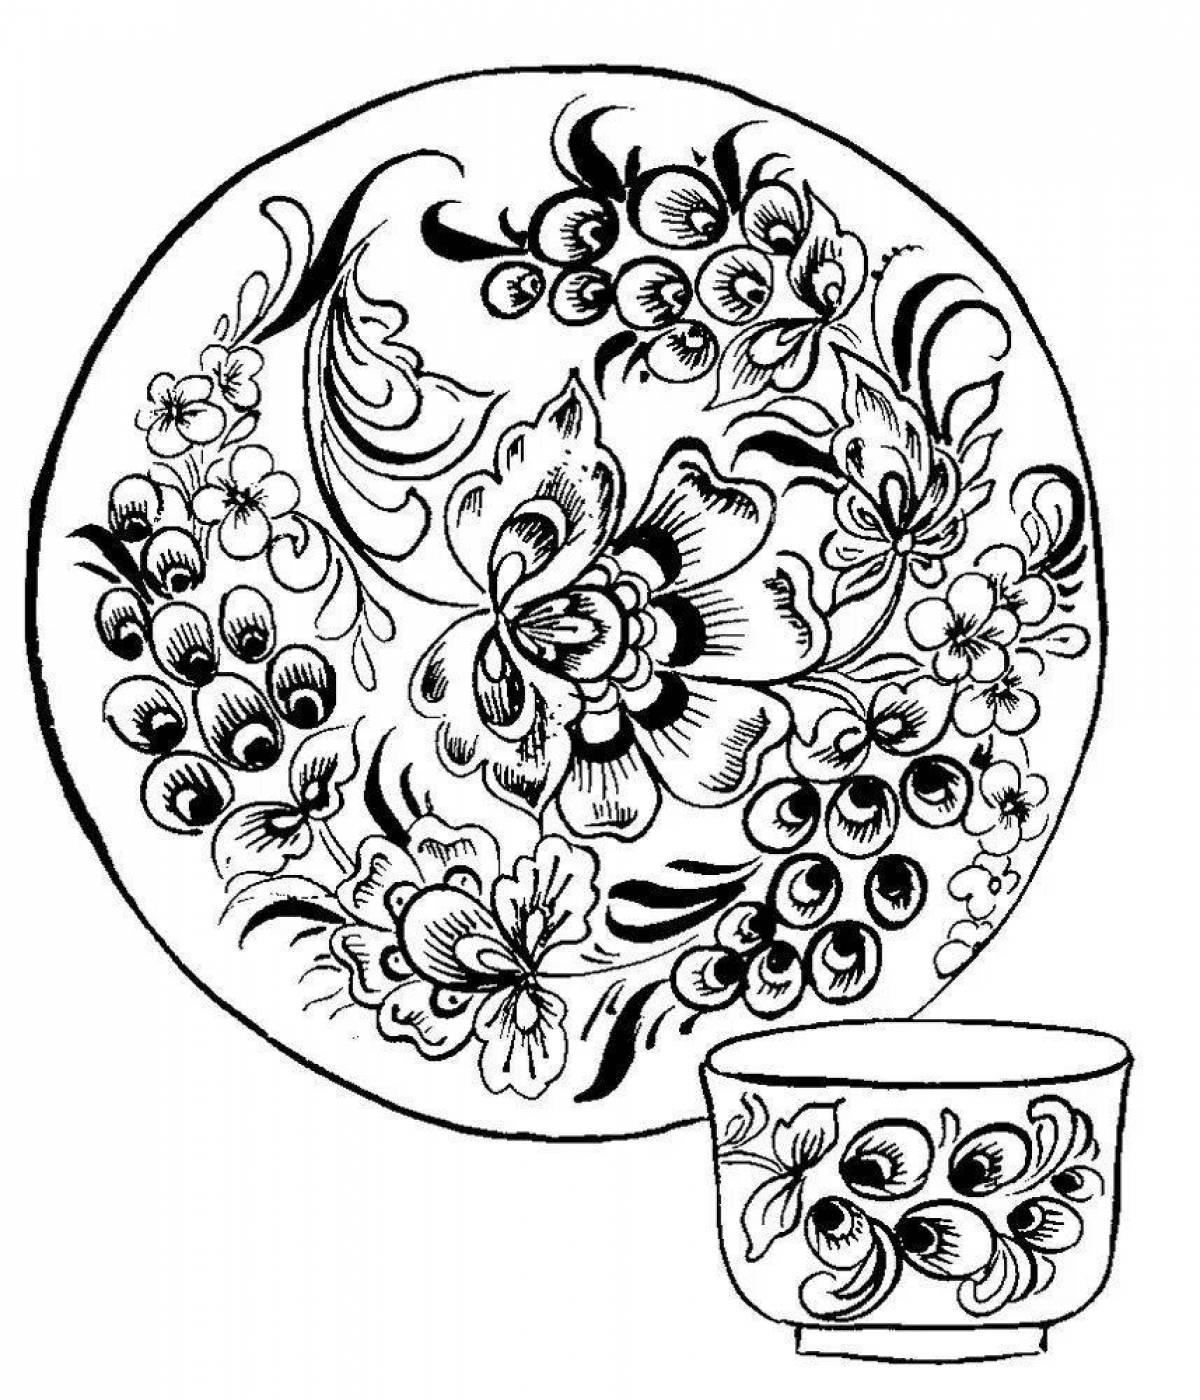 Exquisite coloring Khokhloma pattern in a circle